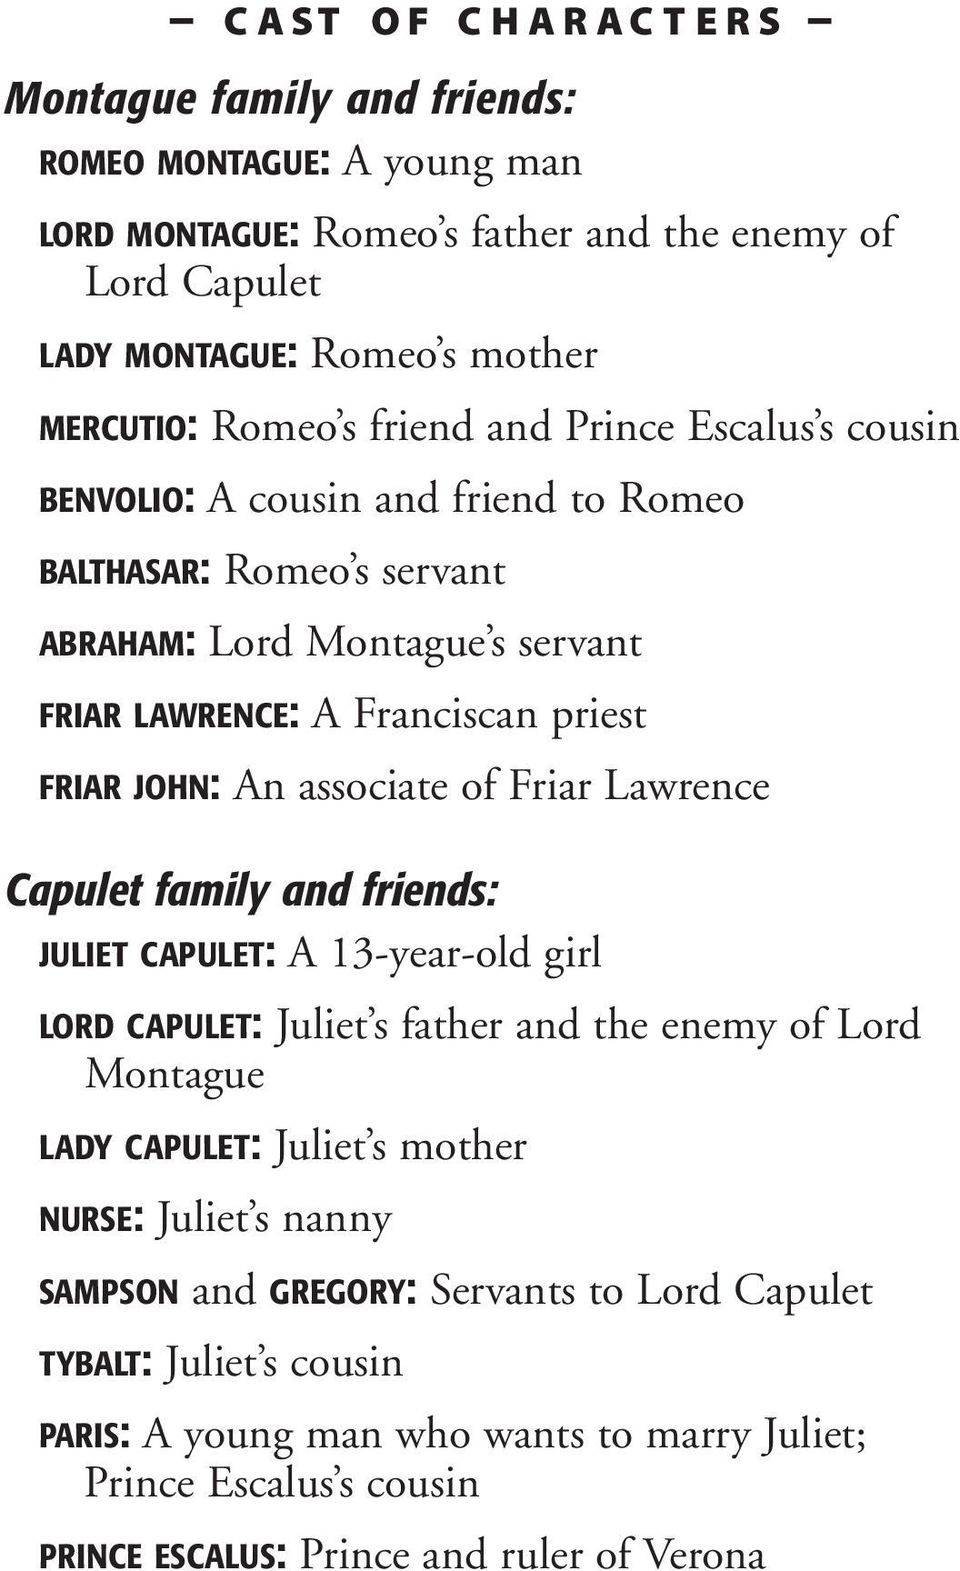 why are the montagues and capulets enemies